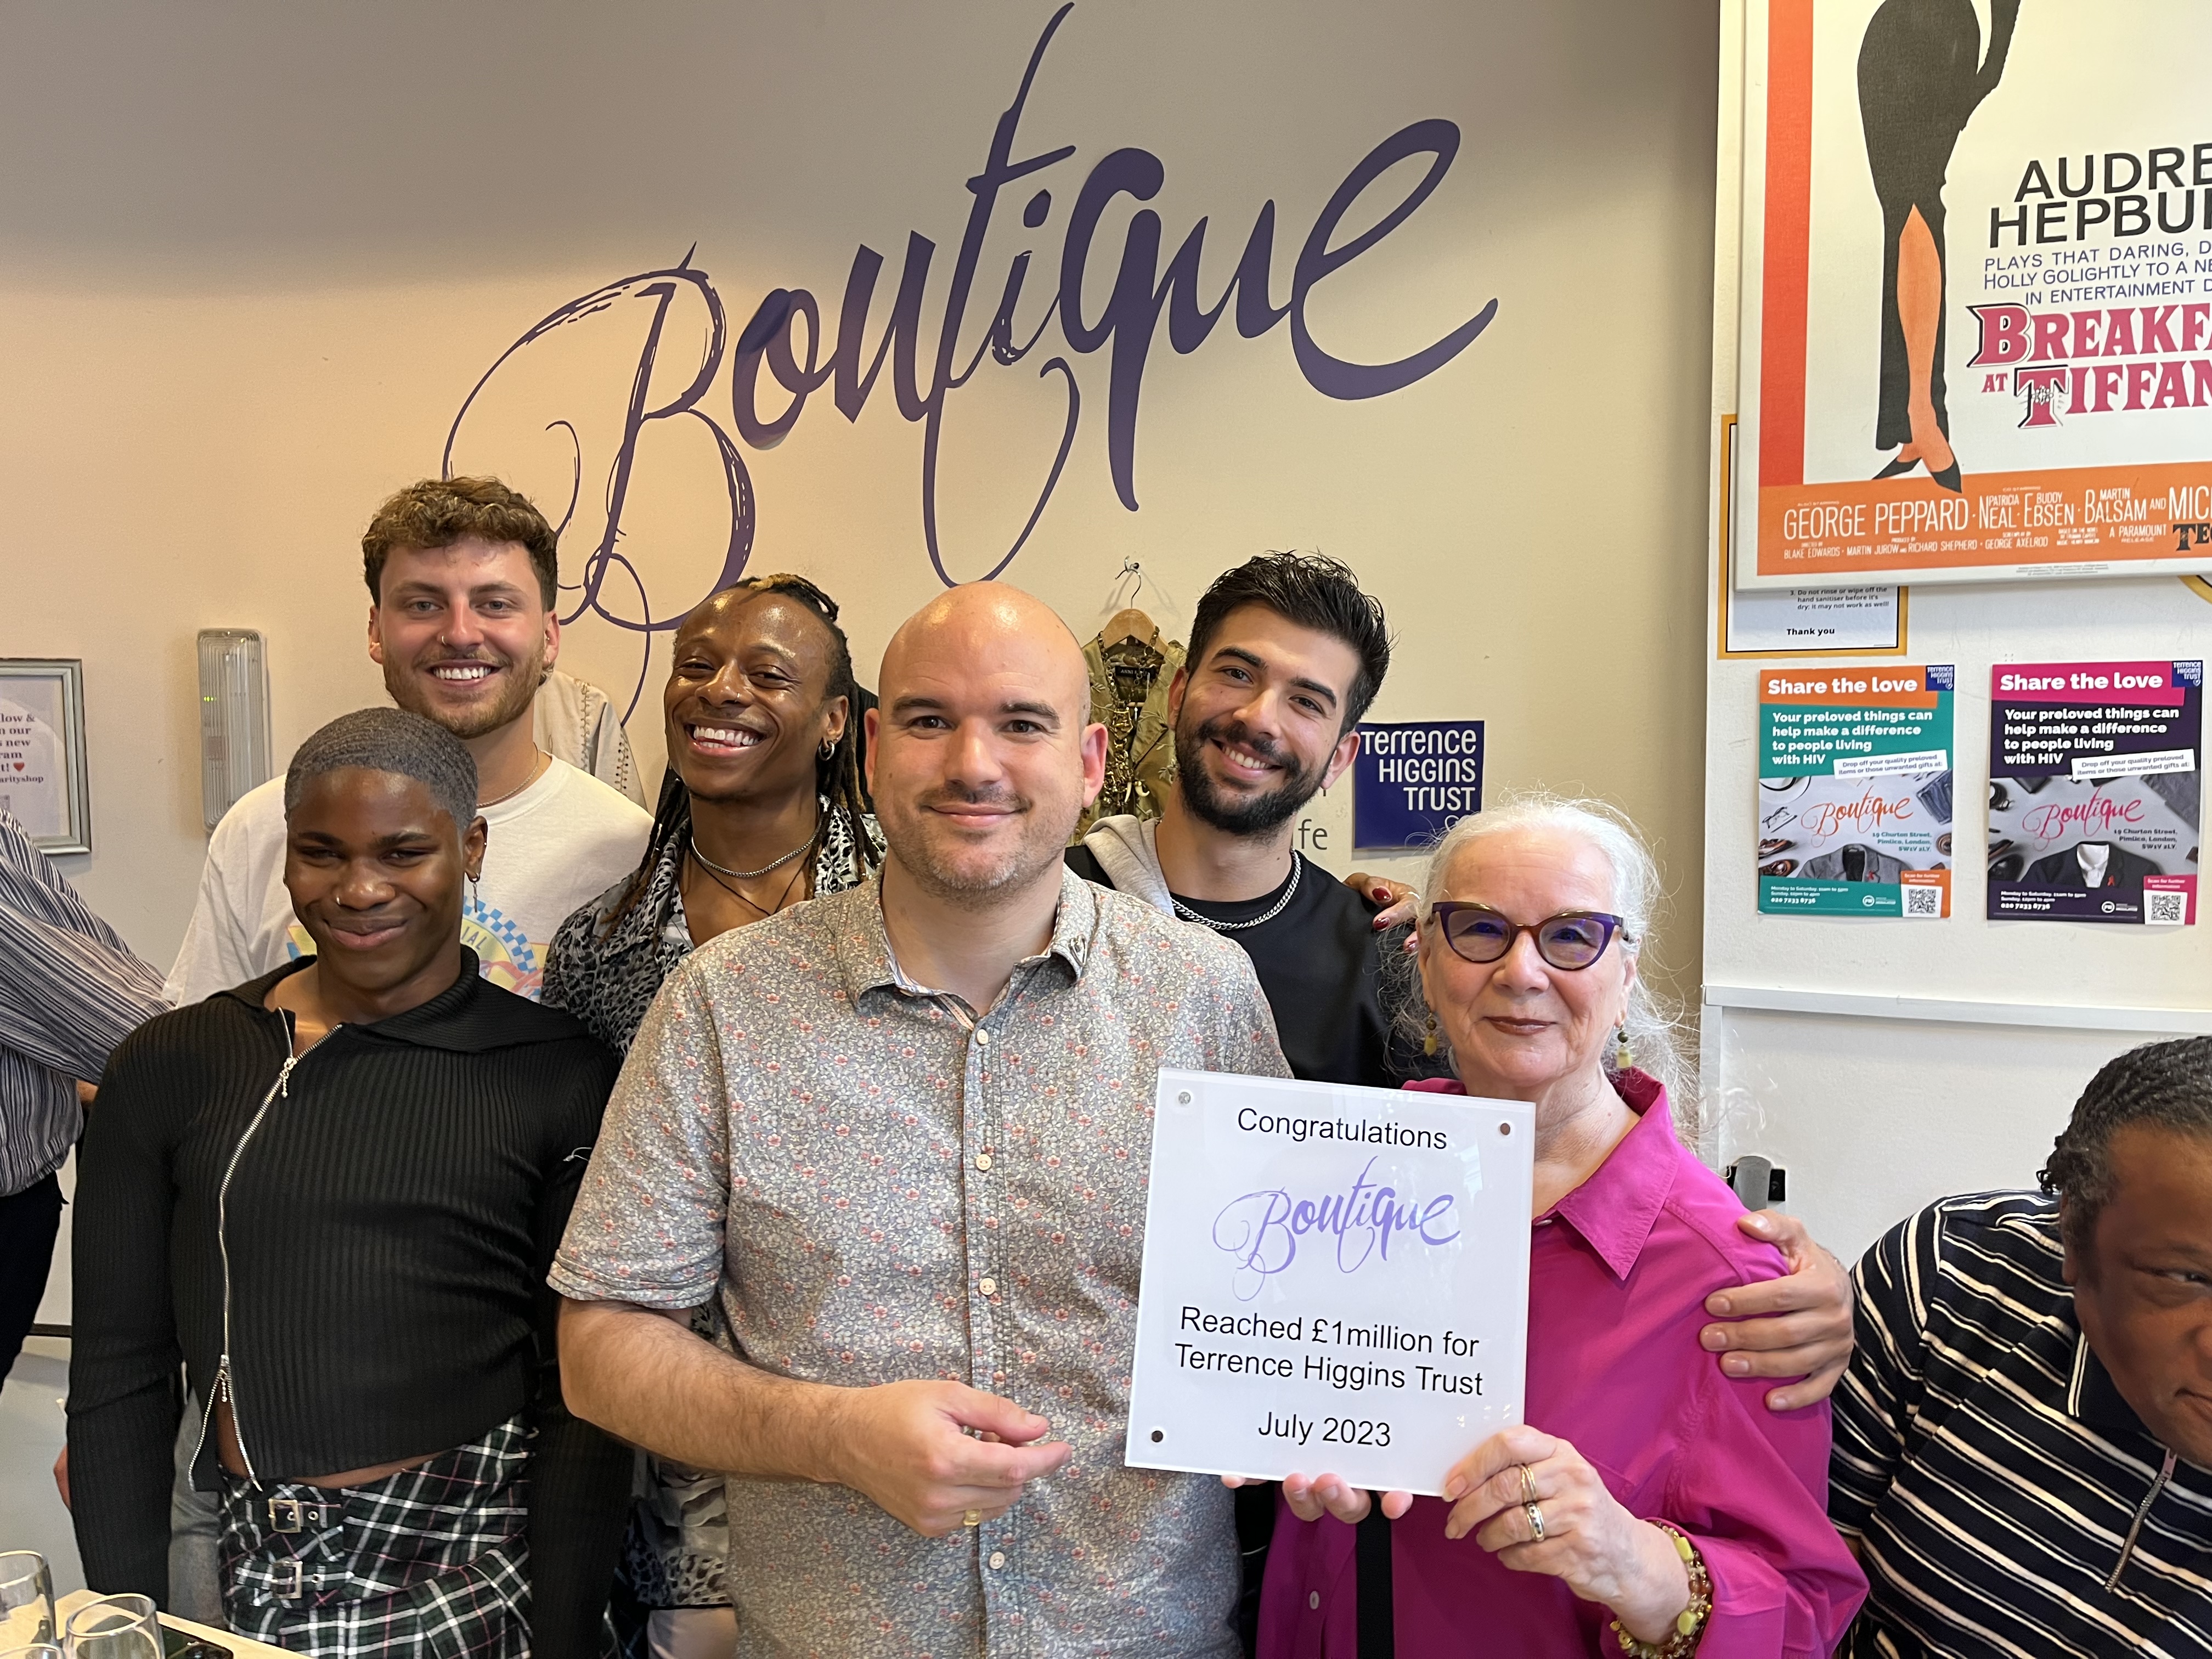 Boutique raises £1m. Chief Executive Richard Angell holds a sign congratulating the boutique with the cast of I Kissed A Boy.